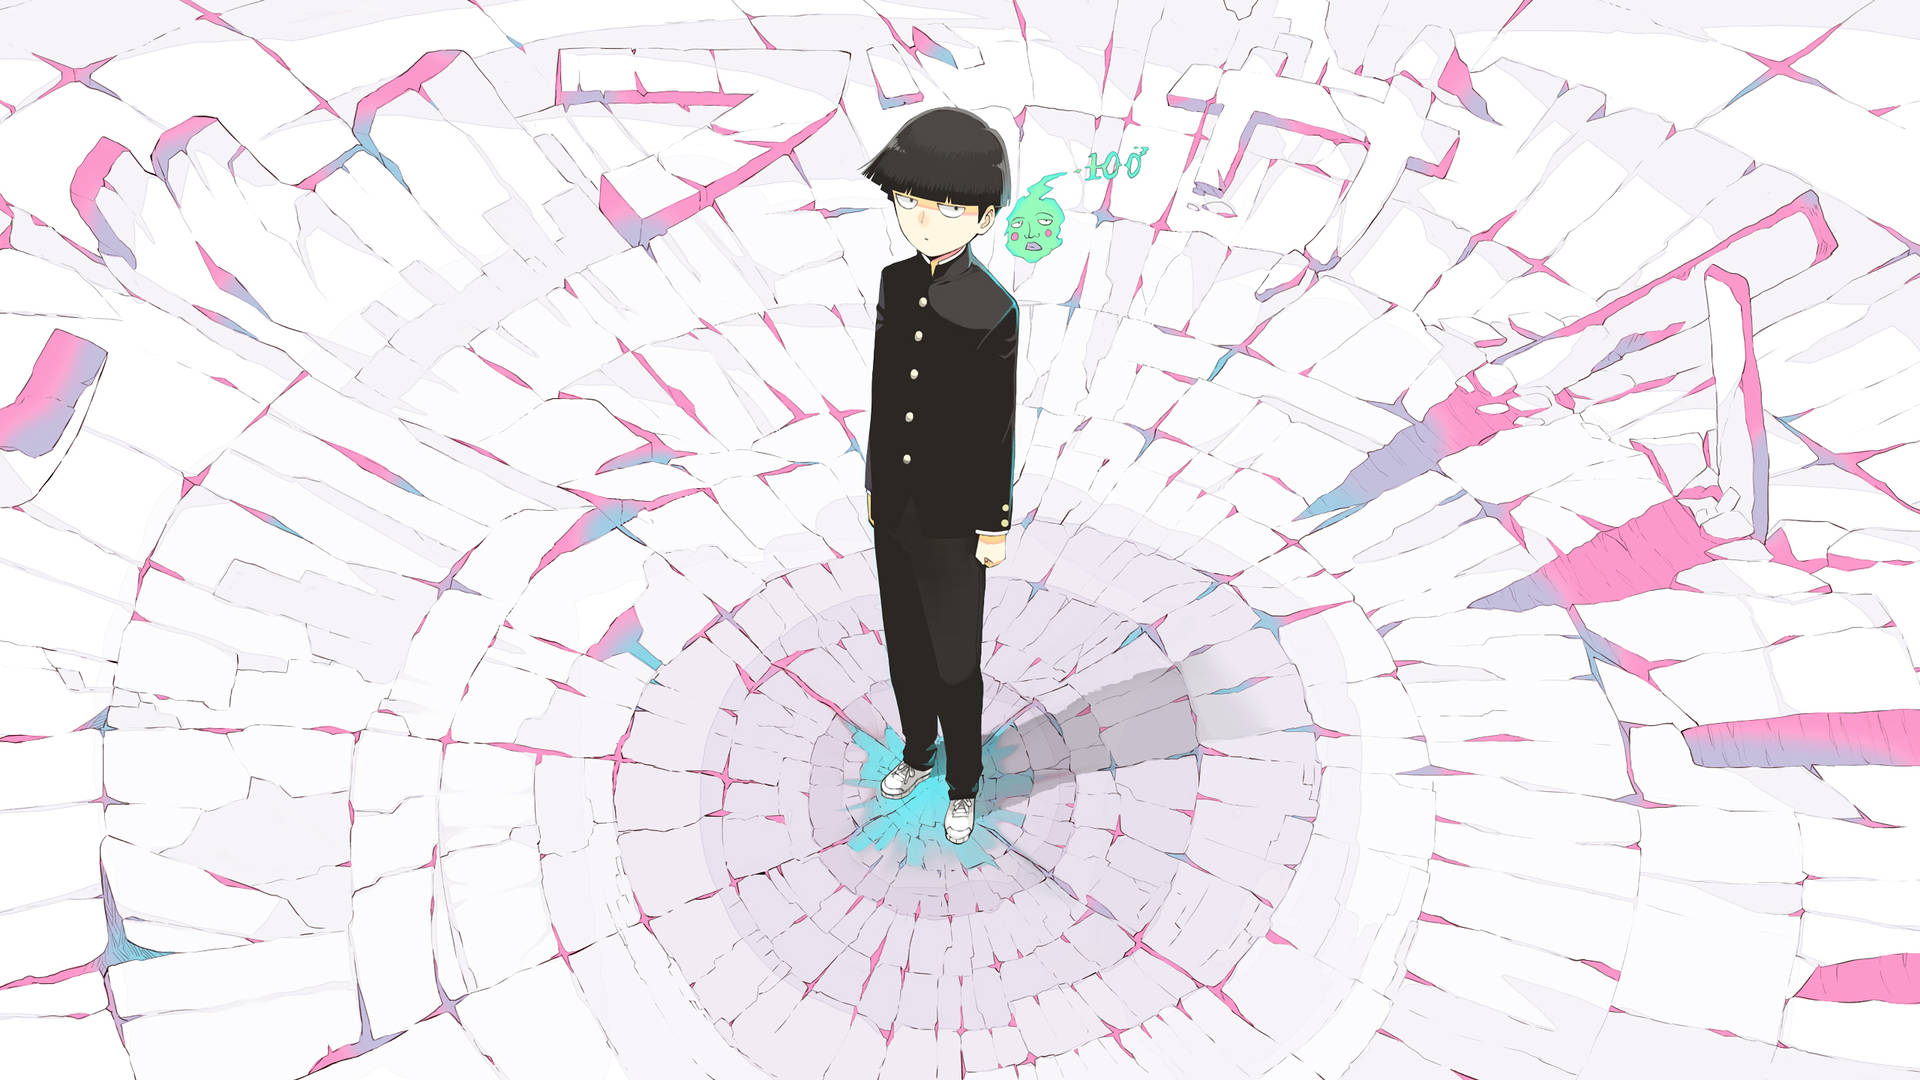 Top 999+ Mob Psycho 100 Wallpaper Full HD, 4K✅Free to Use